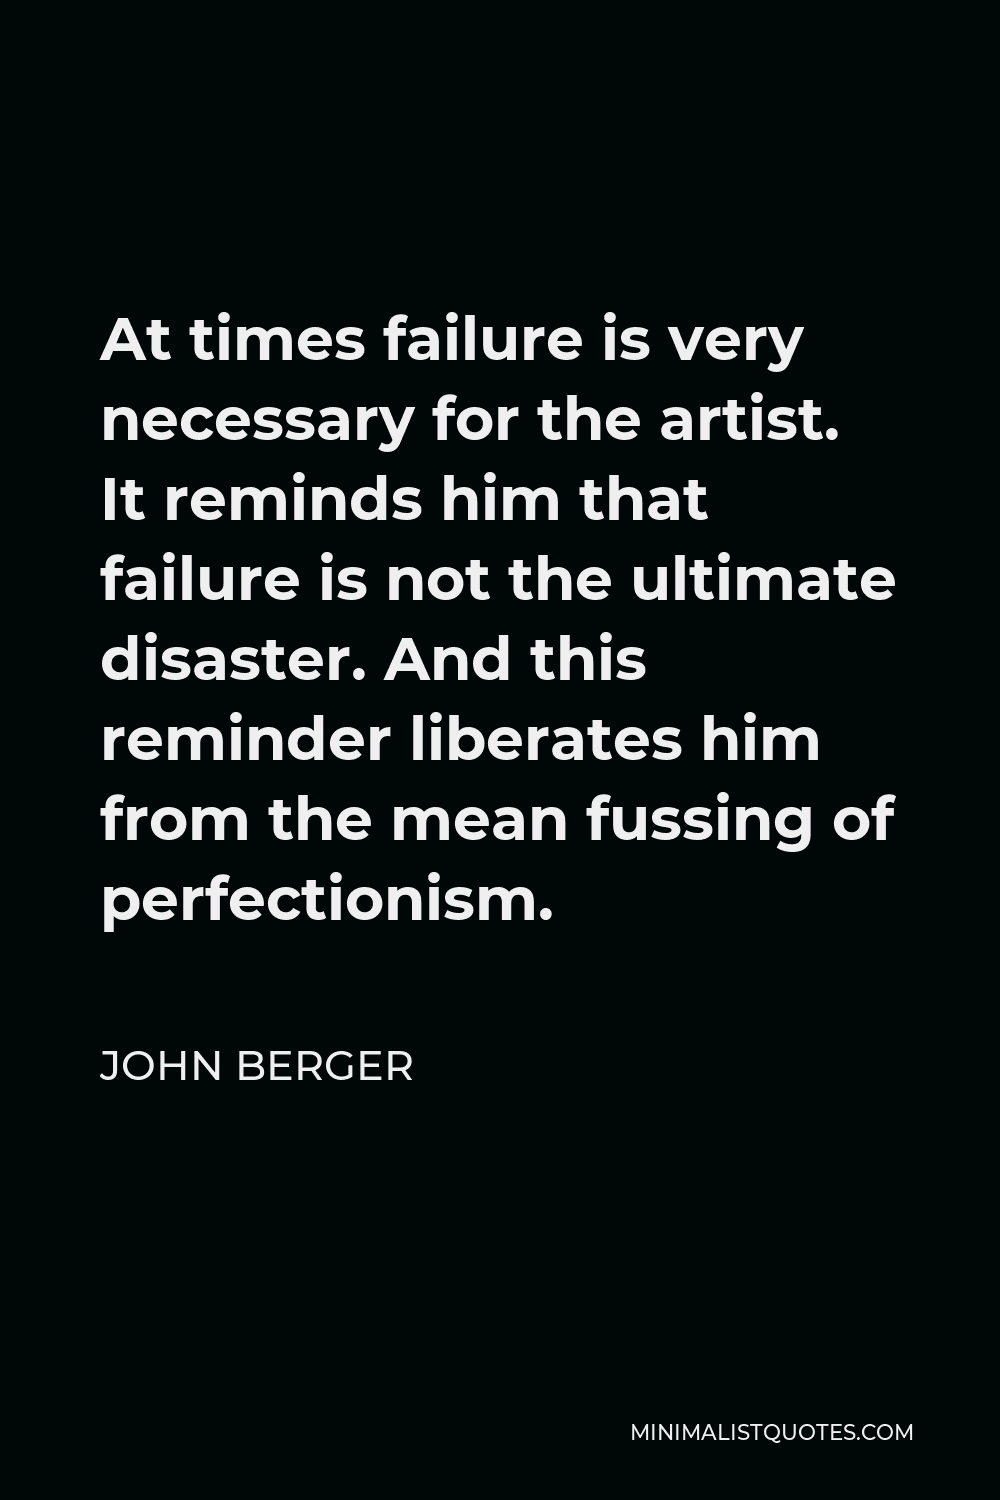 John Berger Quote - At times failure is very necessary for the artist. It reminds him that failure is not the ultimate disaster. And this reminder liberates him from the mean fussing of perfectionism.